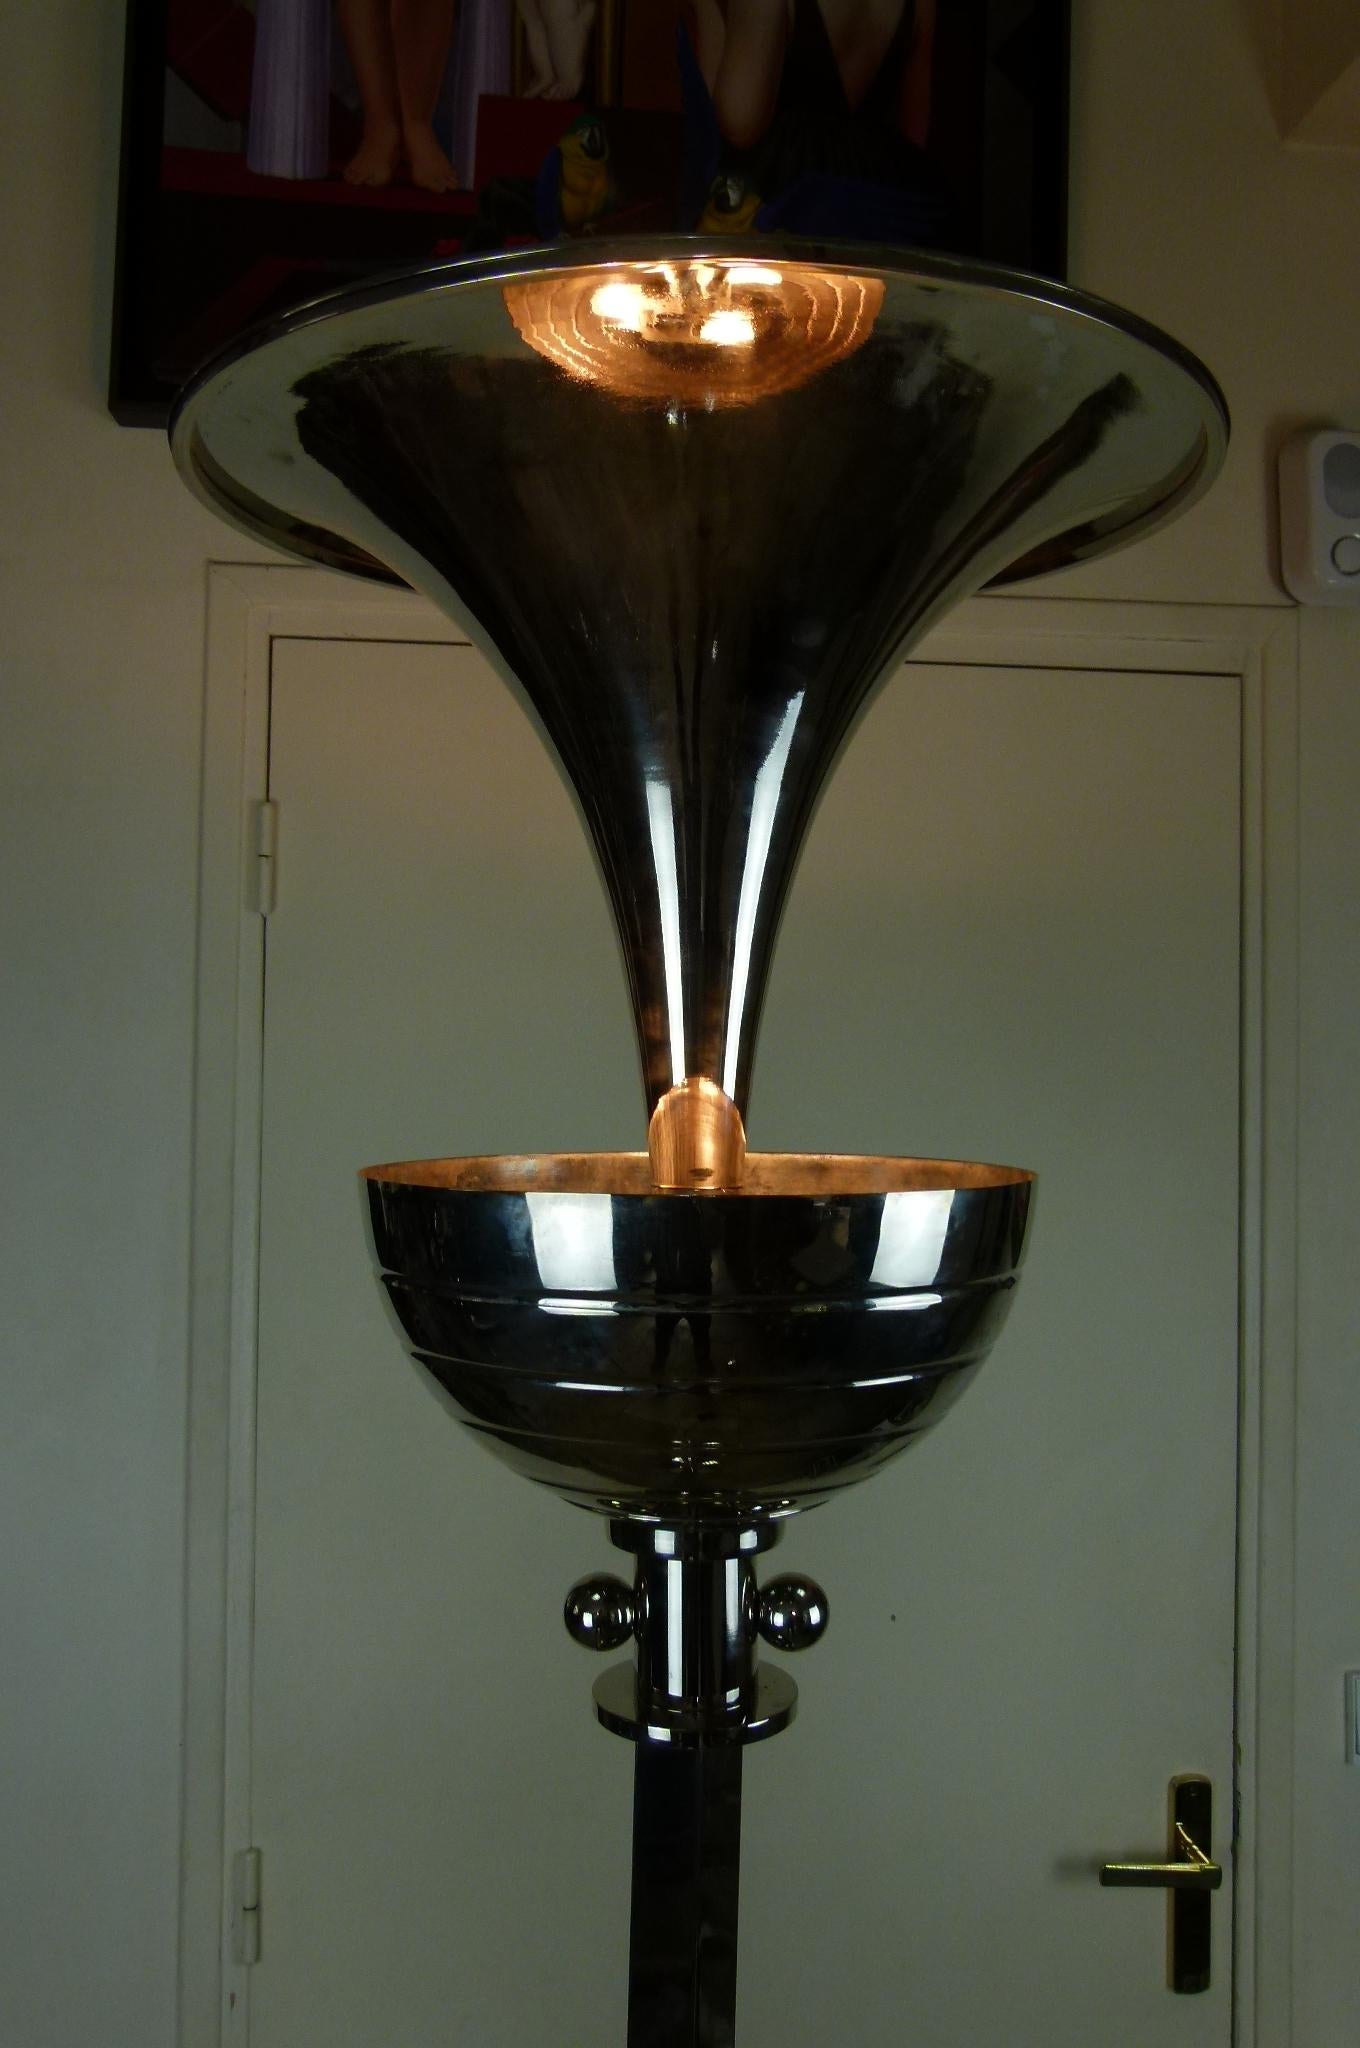 Art Deco Modernist Floor Lamp with a Double Basin in Nickel-plated Metal 1